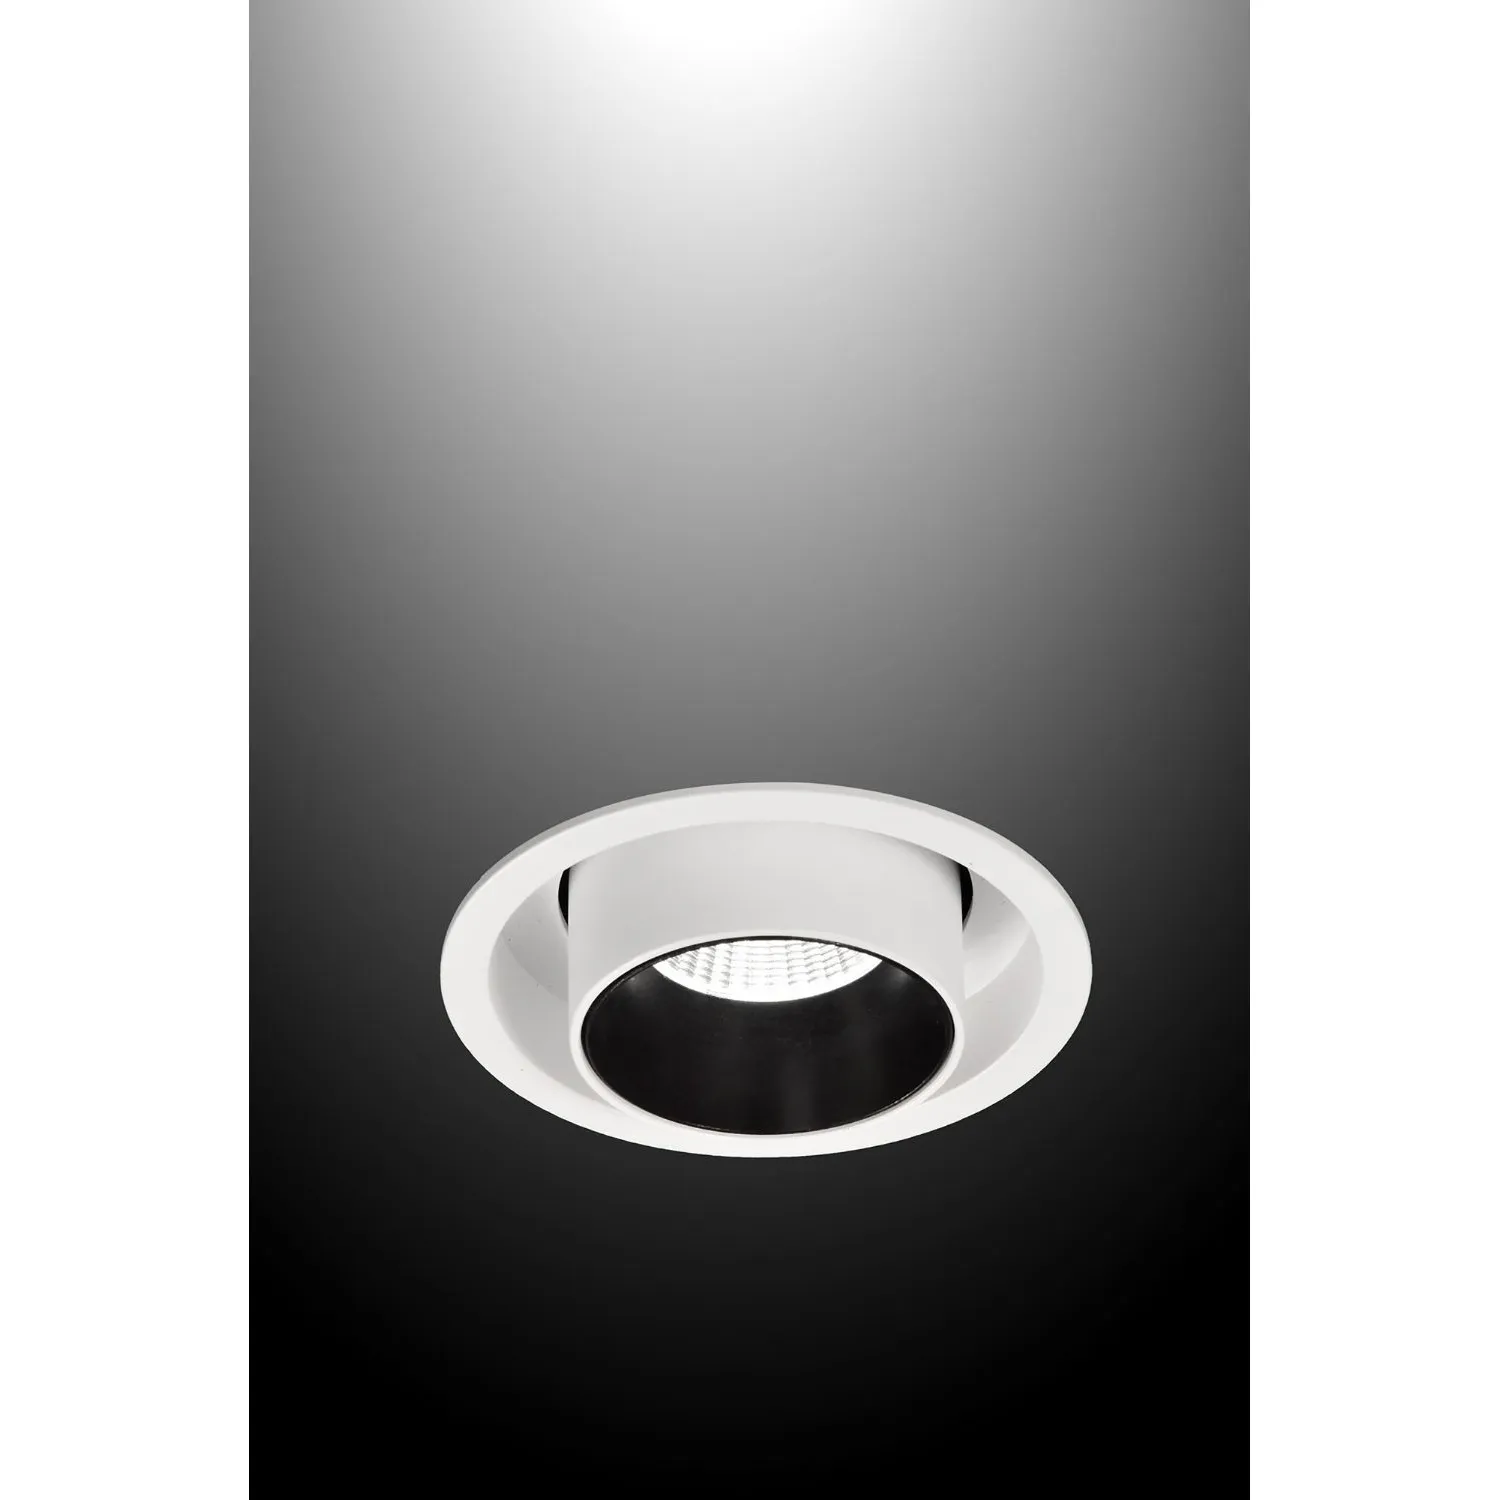 Garda Retractable Recessed Swivel Spotlight, 12W, 4000K, 1080lm, Matt White And Black, Cut Out 95mm, Driver Included, Driver Included, 3yrs Warranty